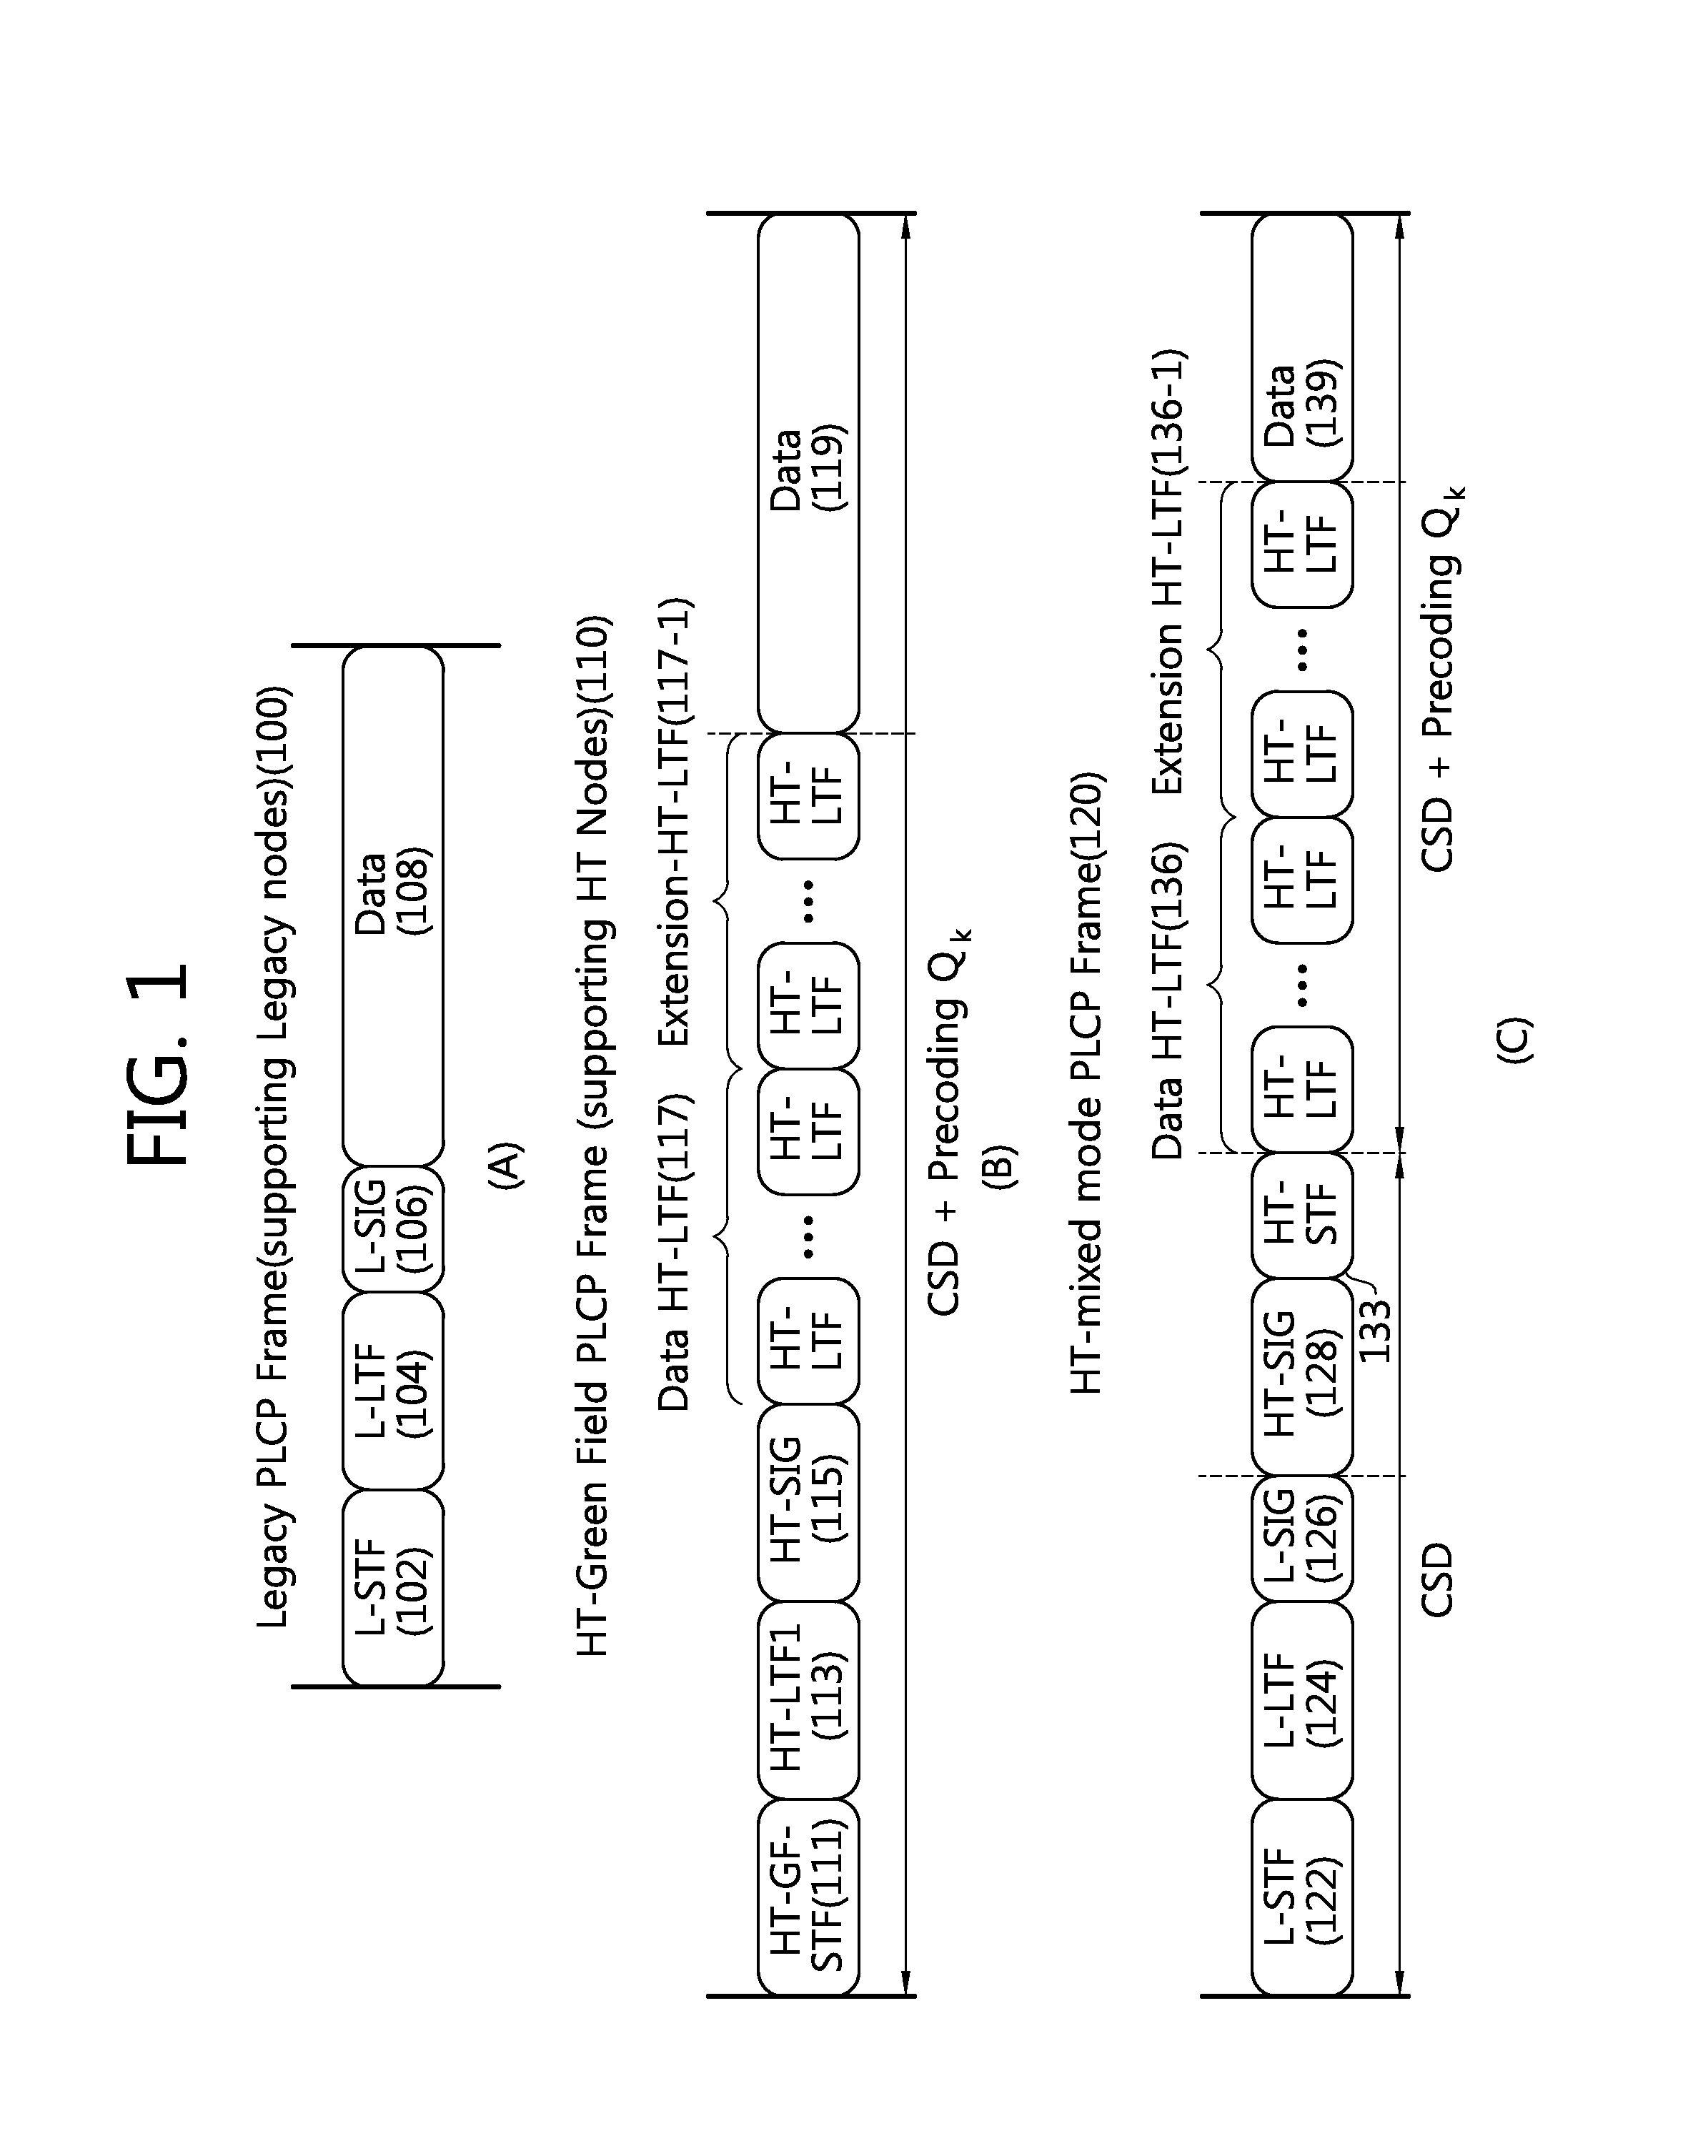 Method and apparatus for indicating a frame type using a preamble